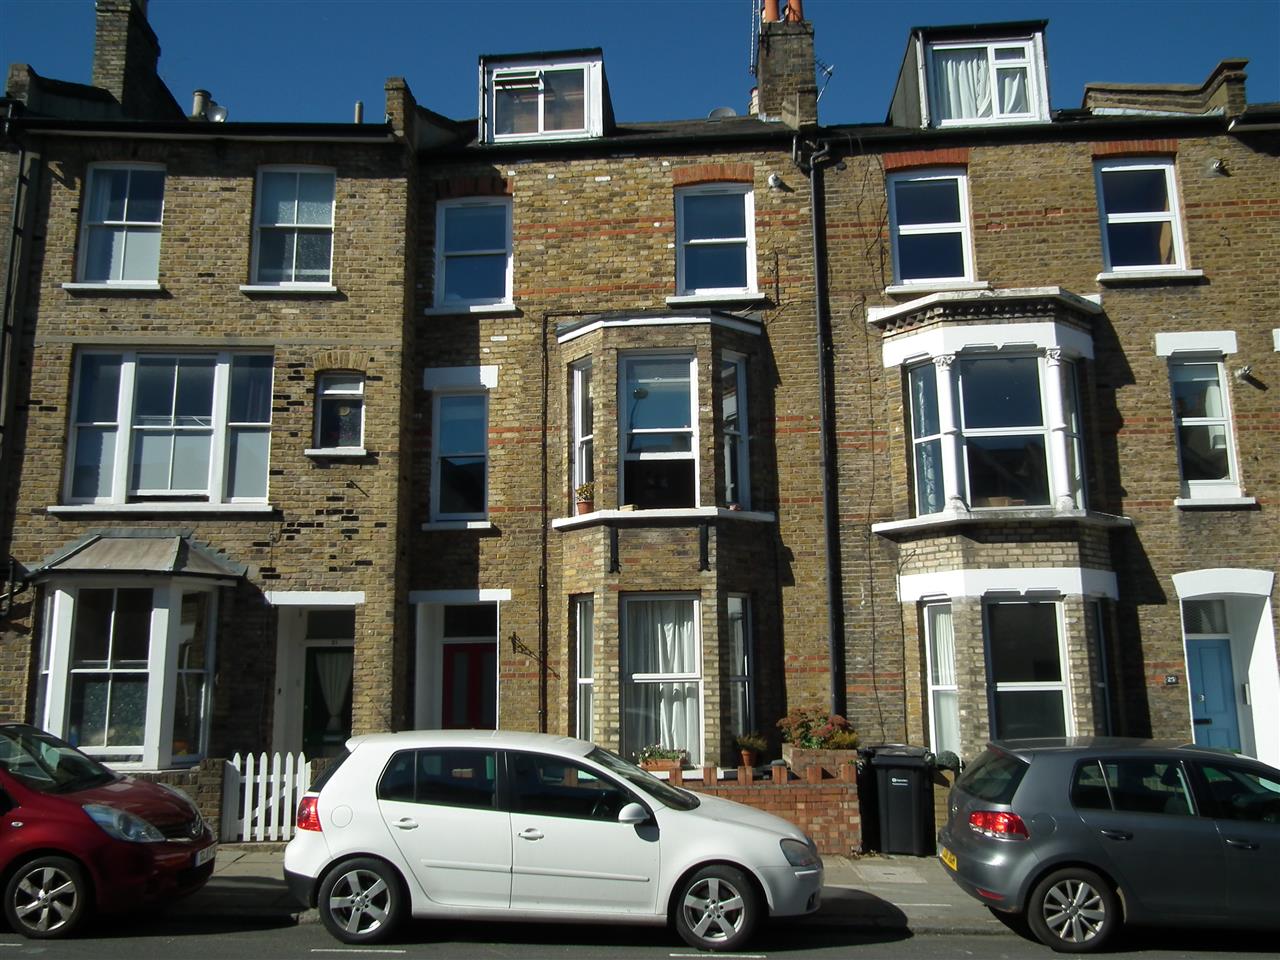 AVAILABLE AT SHORT NOTICE. A stylish and well presented first floor FURNISHED flat located on sought after turning in the heart of Dartmouth Park. The accommodation comprises of one double bedroom with wardrobe and storage, bathroom with three piece suite and open plan reception/fitted kitchen. ...